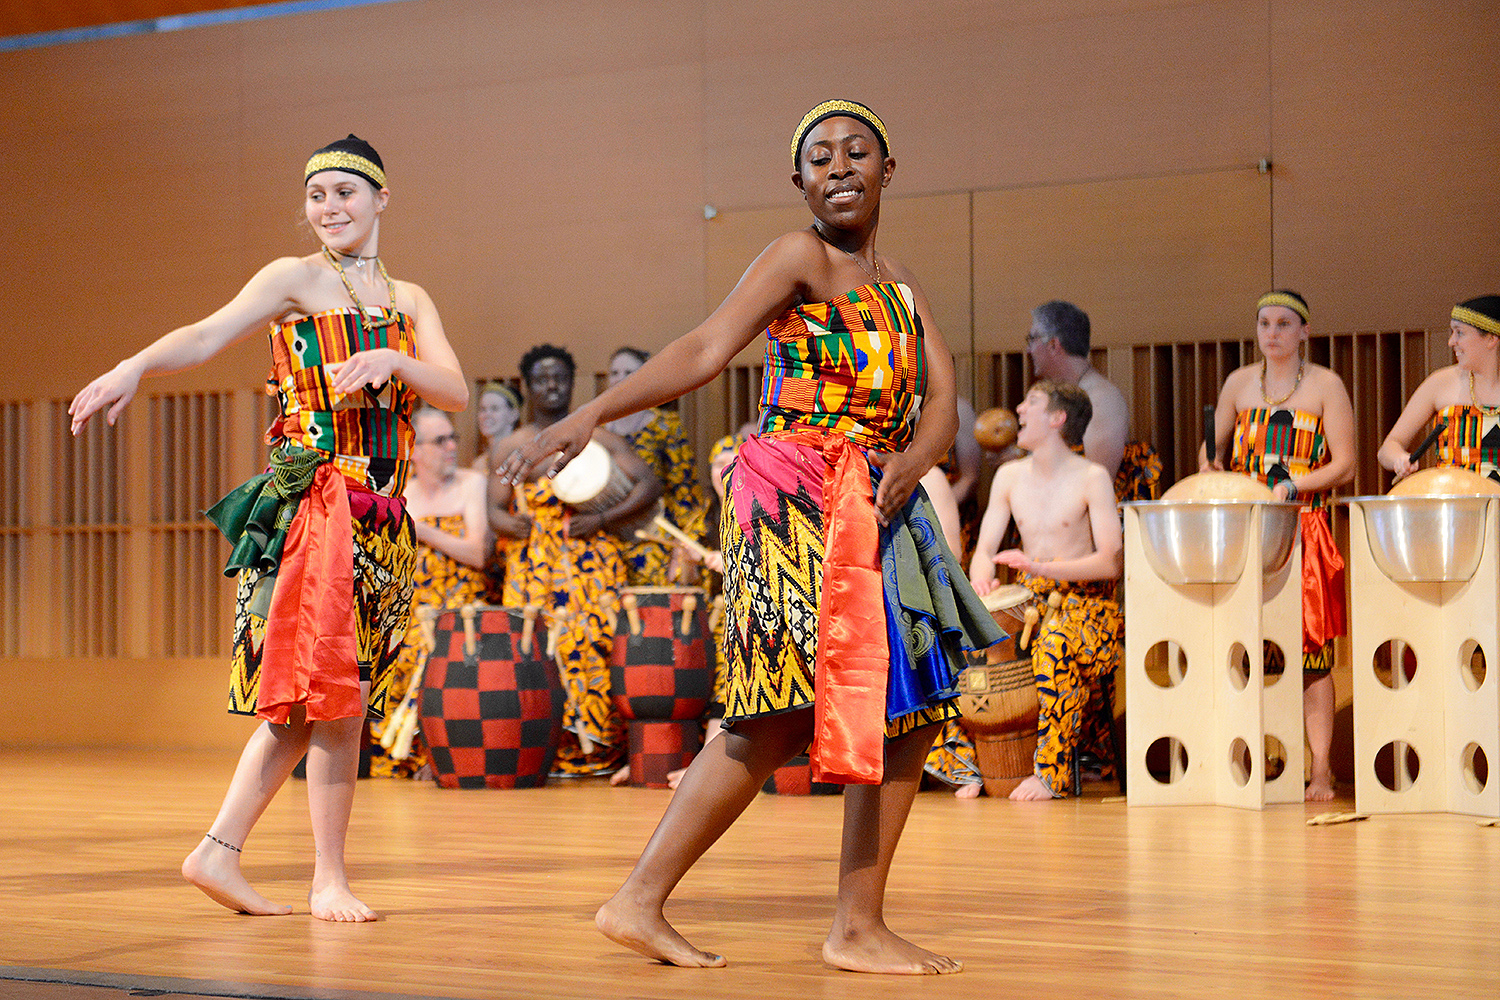 The afternoon concert featured Wesleyan's  West African Drumming and Dance Ensemble, Tufts University's Kiniwe Ensemble with the Agbekor Drum and Dance Society, University of Massachusetts Dartmouth's Kekeli African Music and Dance Ensemble, Berklee College of Music's West African Drum and Dance Ensemble, Montclair State University's West African Drumming and Dance Ensemble with the Rhythm Monsters, and Ayanda Clarke '99.